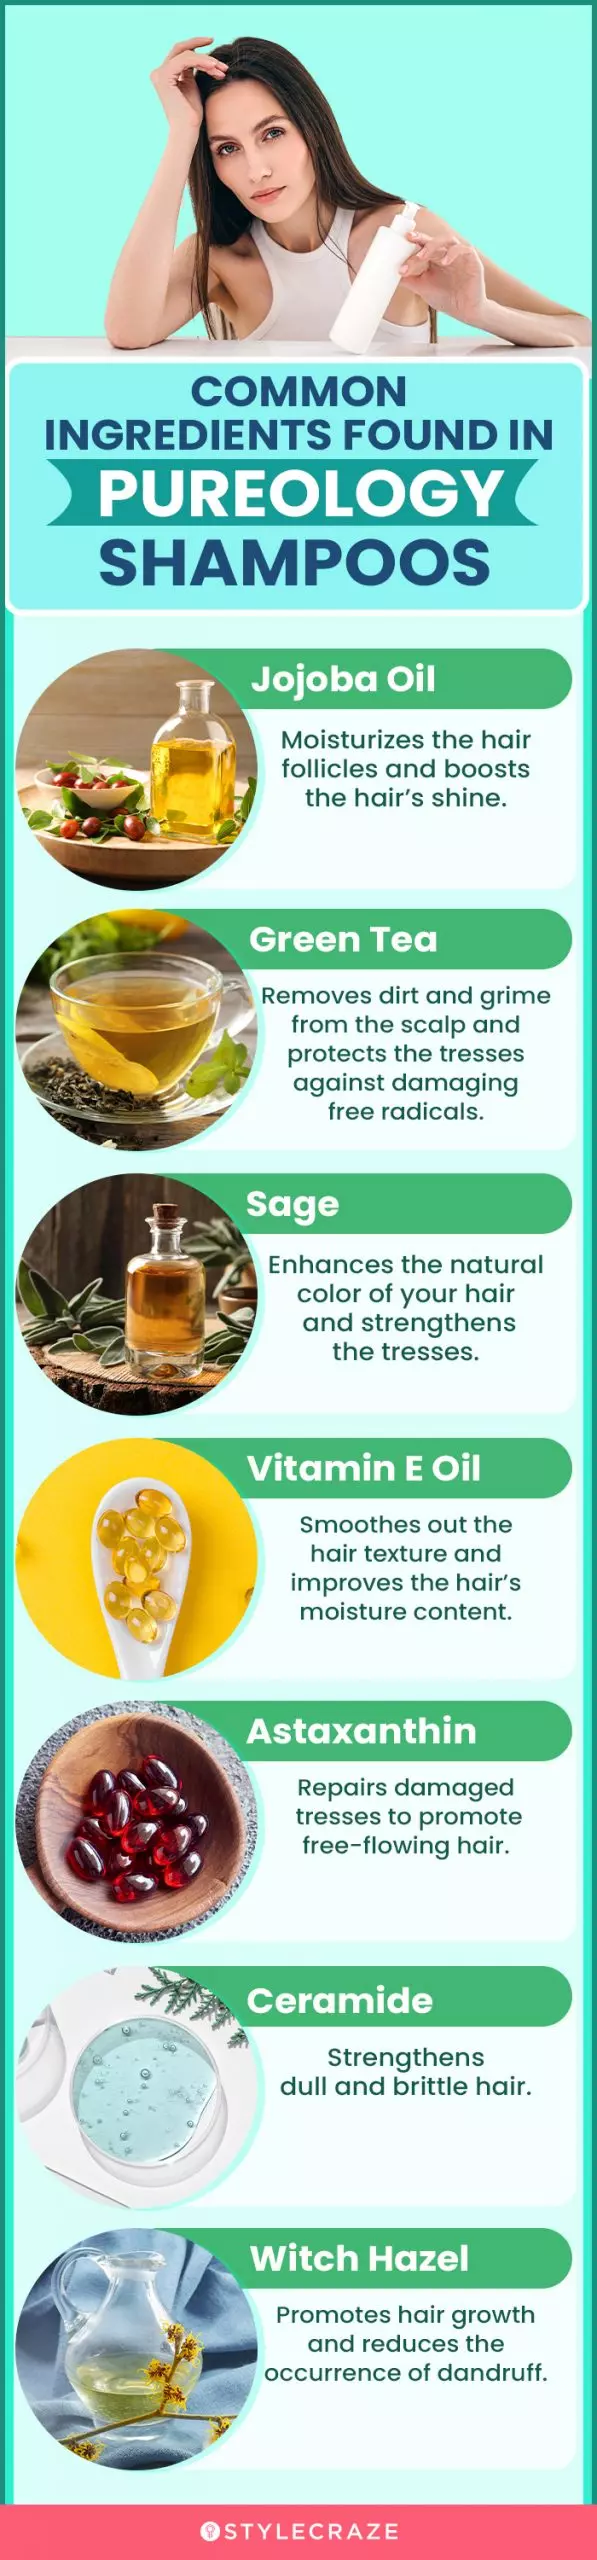 Common Ingredients Found In Pureology Shampoos (infographic)